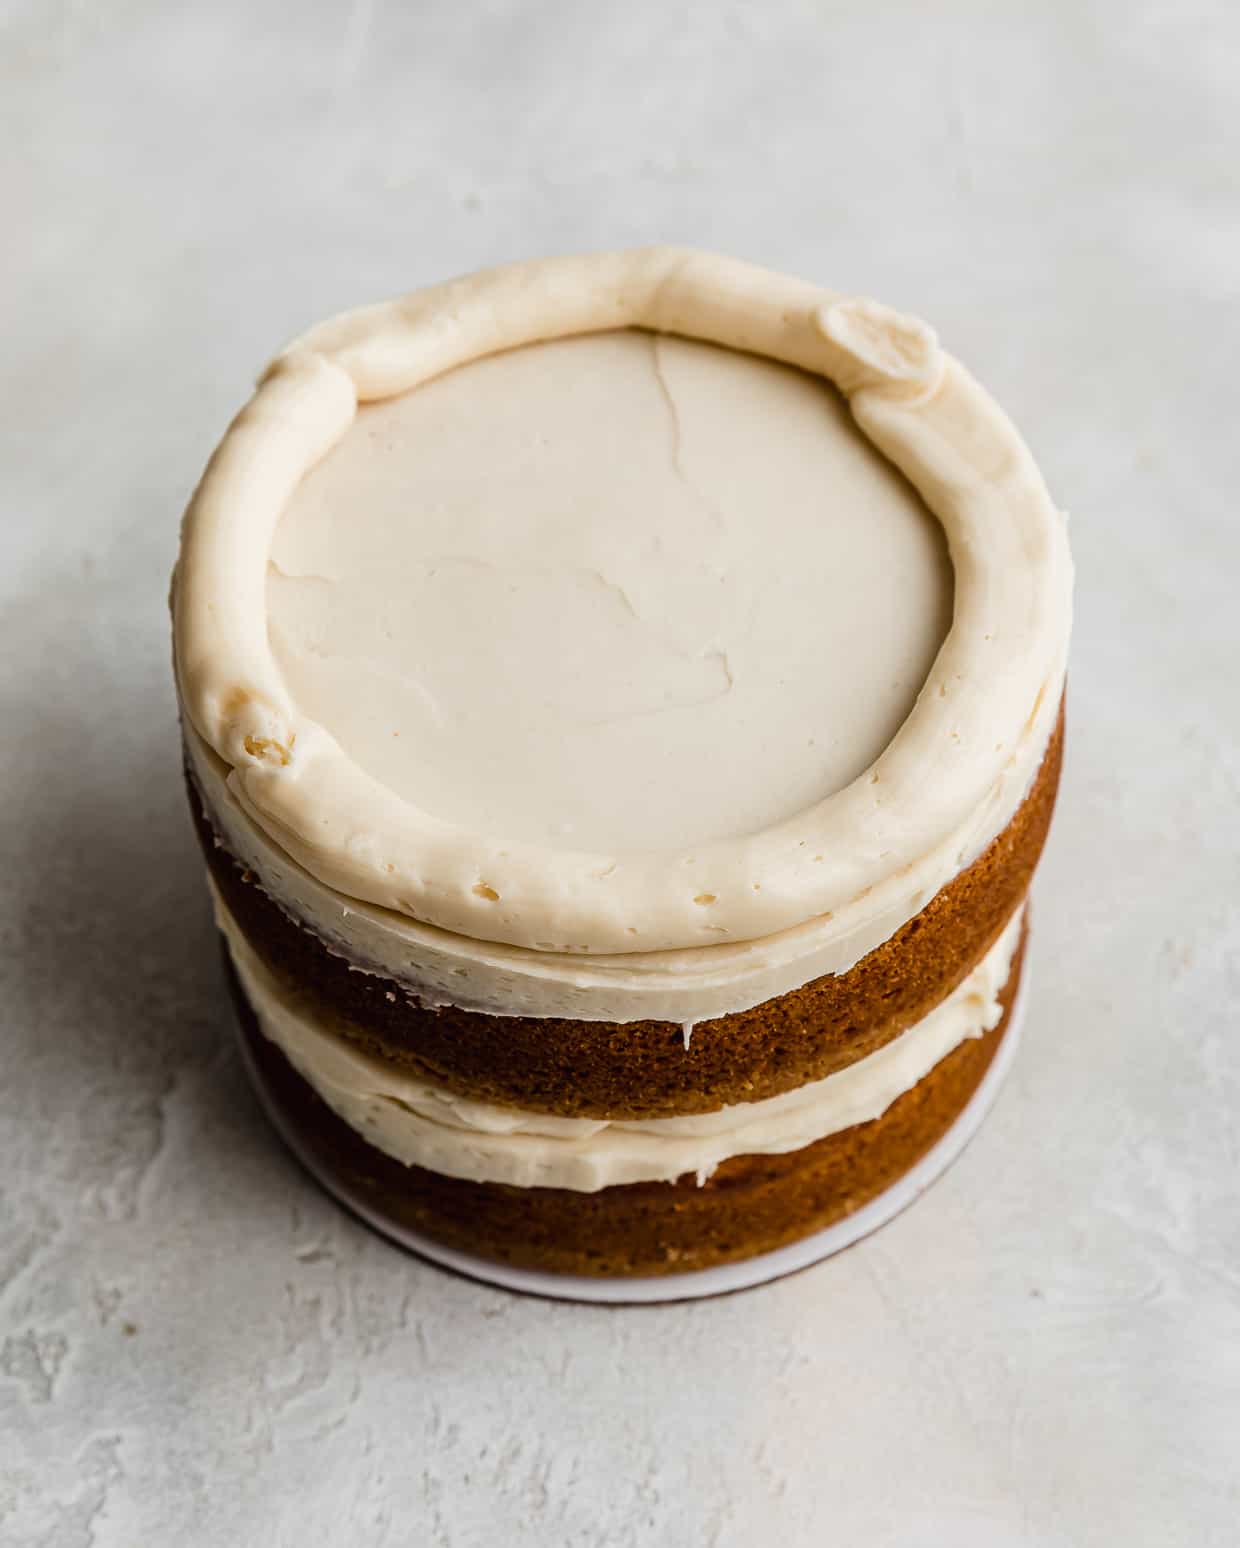 A Golden Oreo buttercream frosting piped along the perimeter of a cake layer.